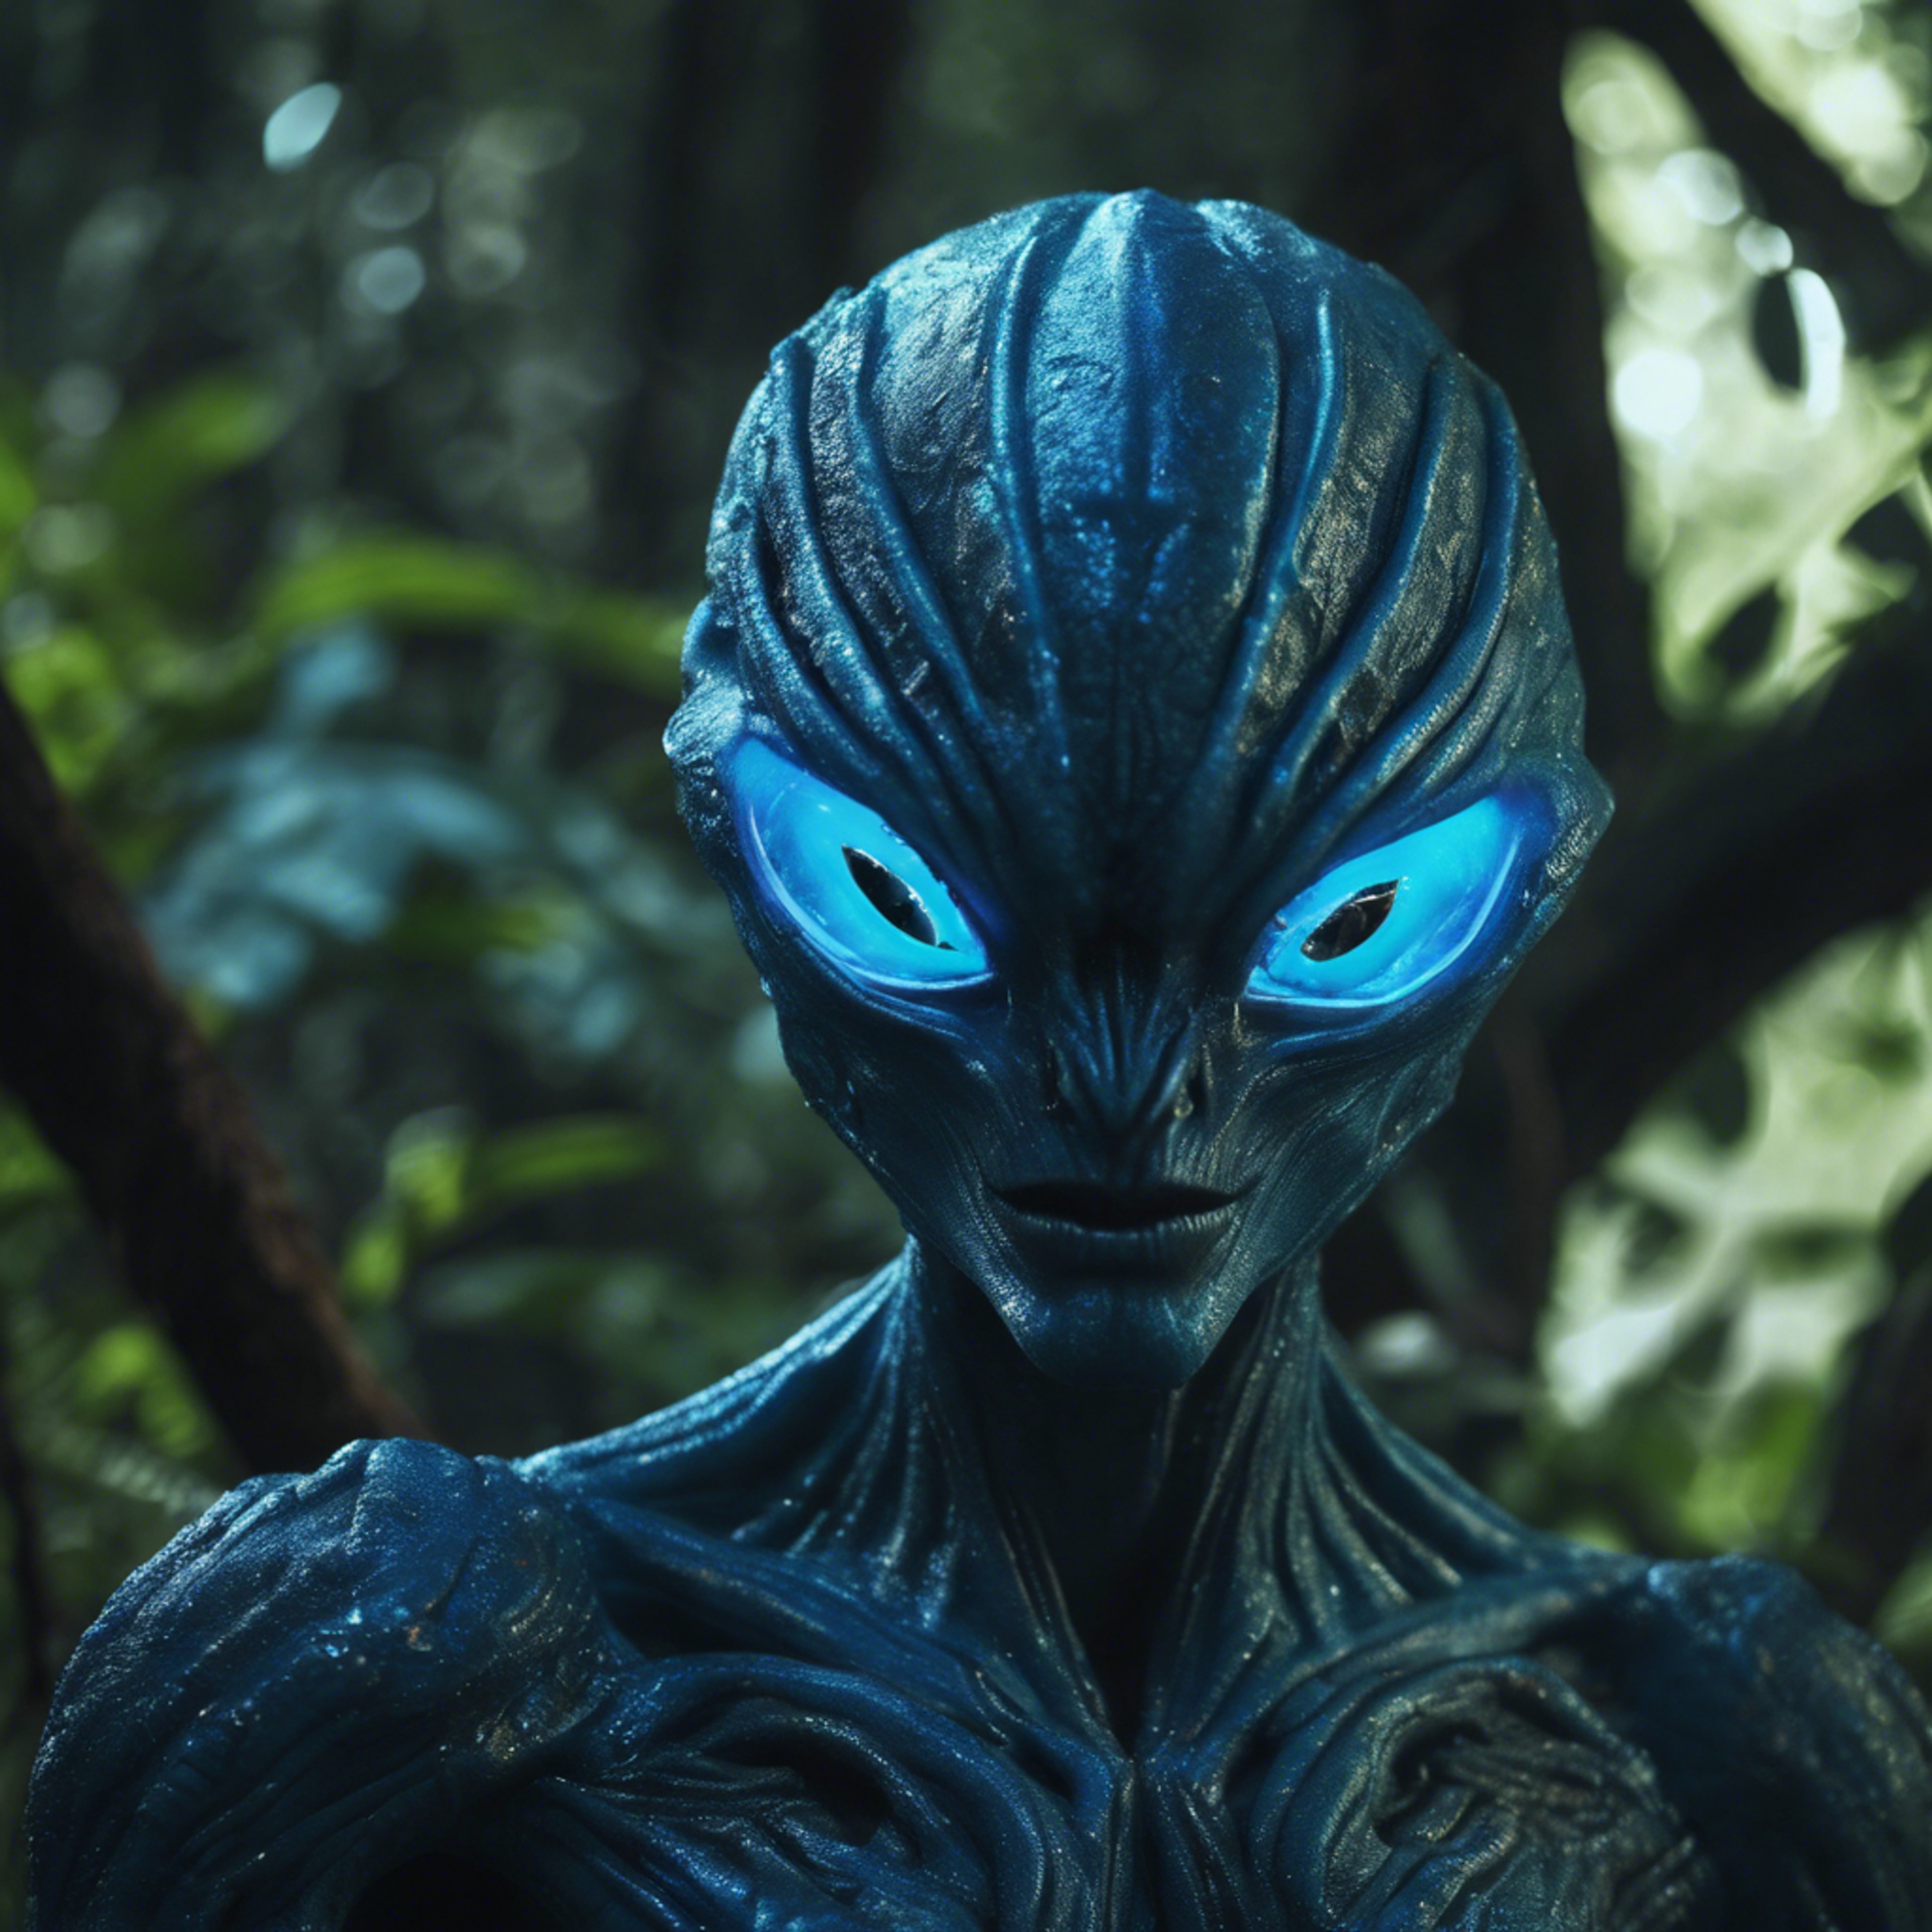 An alien creature with neon blue skin and illuminated eyes against a dark jungle background. Wallpaper[708c8f46617d45aba821]